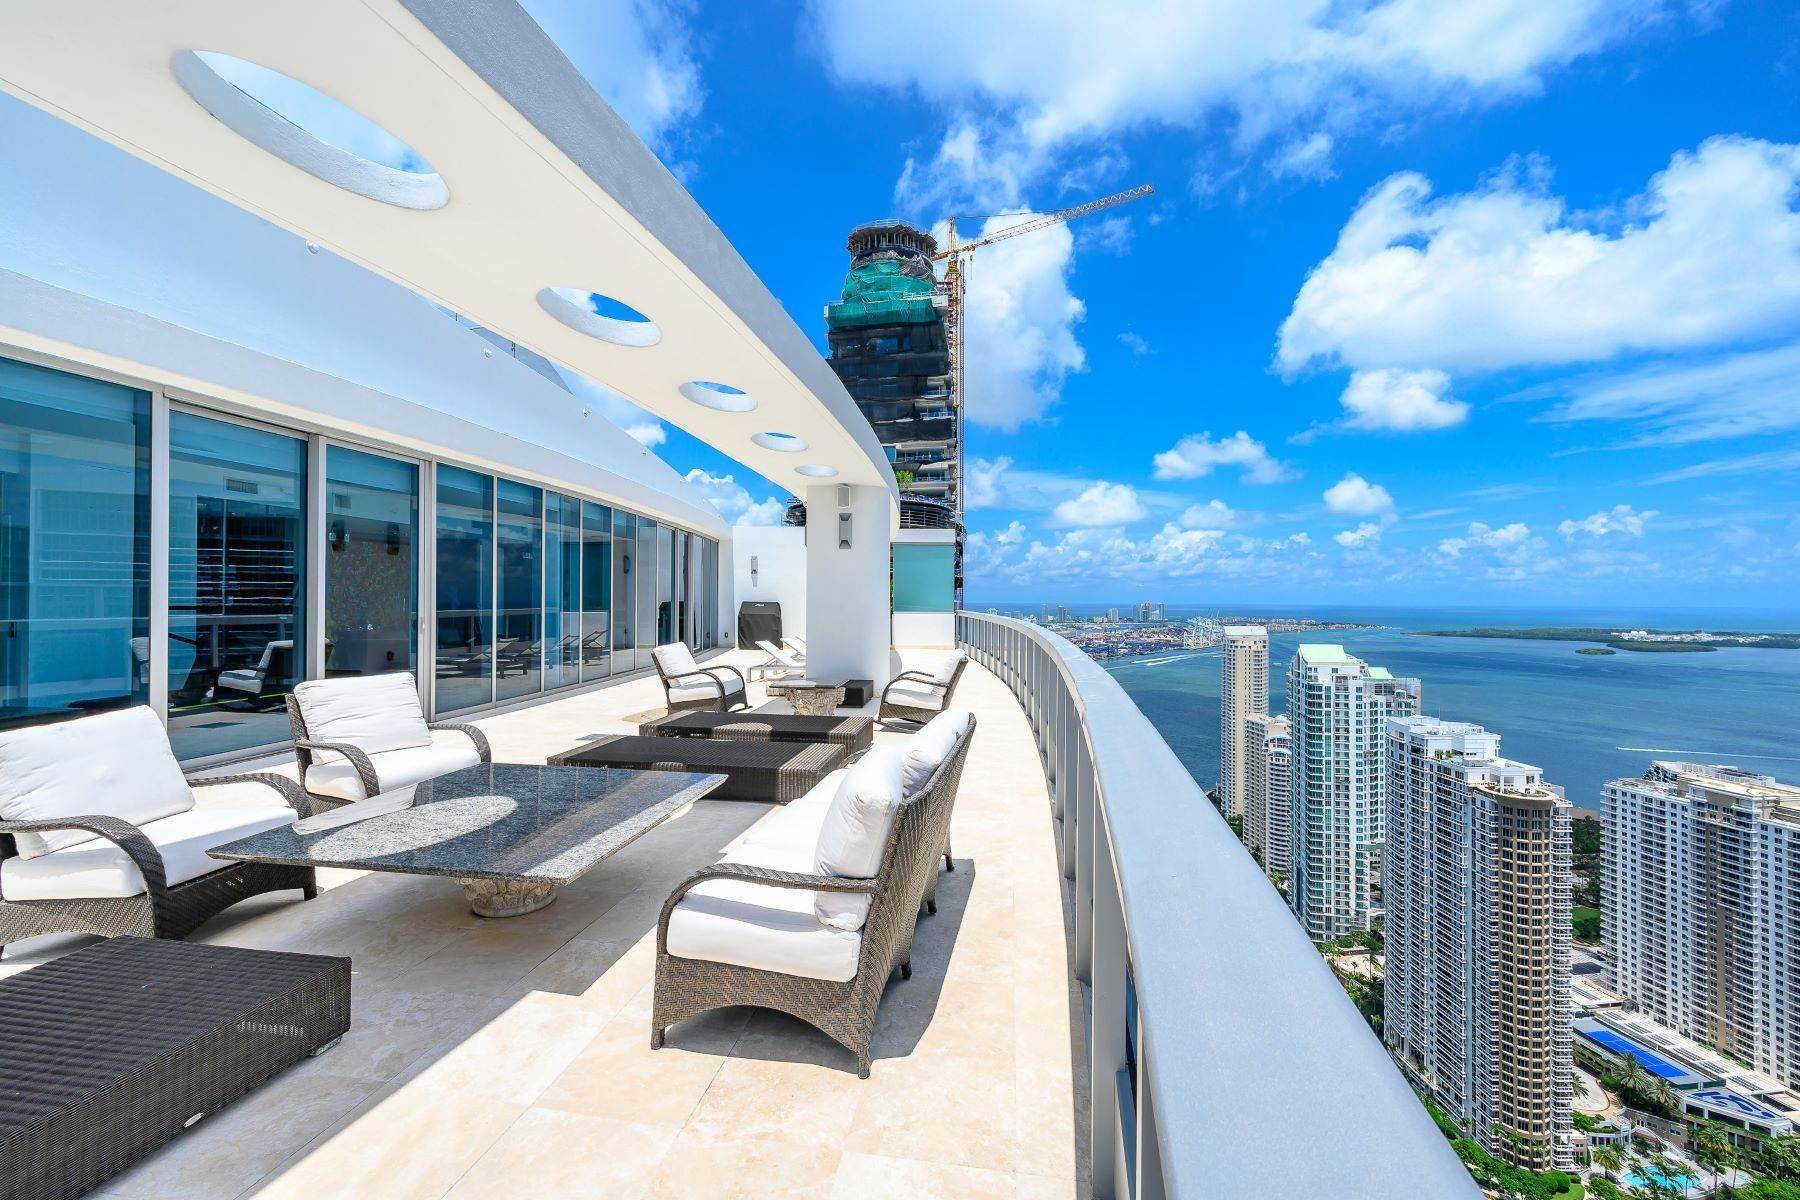 Condominiums for Sale at 200 Biscayne Blvd Wy, #5402, Miami, FL 200 Biscayne Blvd Wy, 5402 Miami, Florida 33131 United States